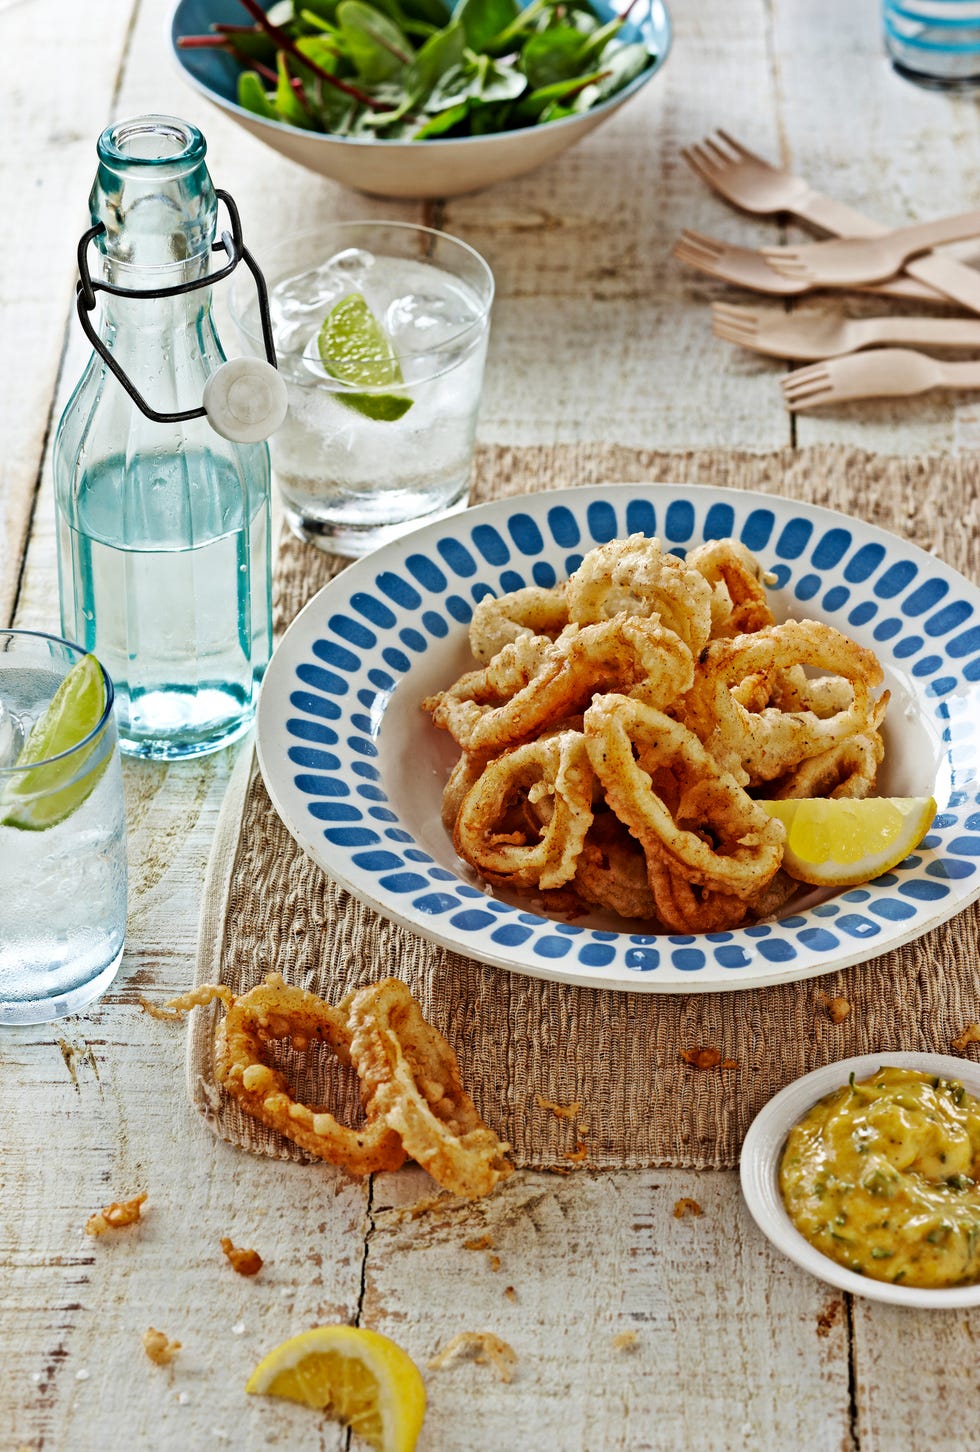 fried squid rings, calamari, on wooden table